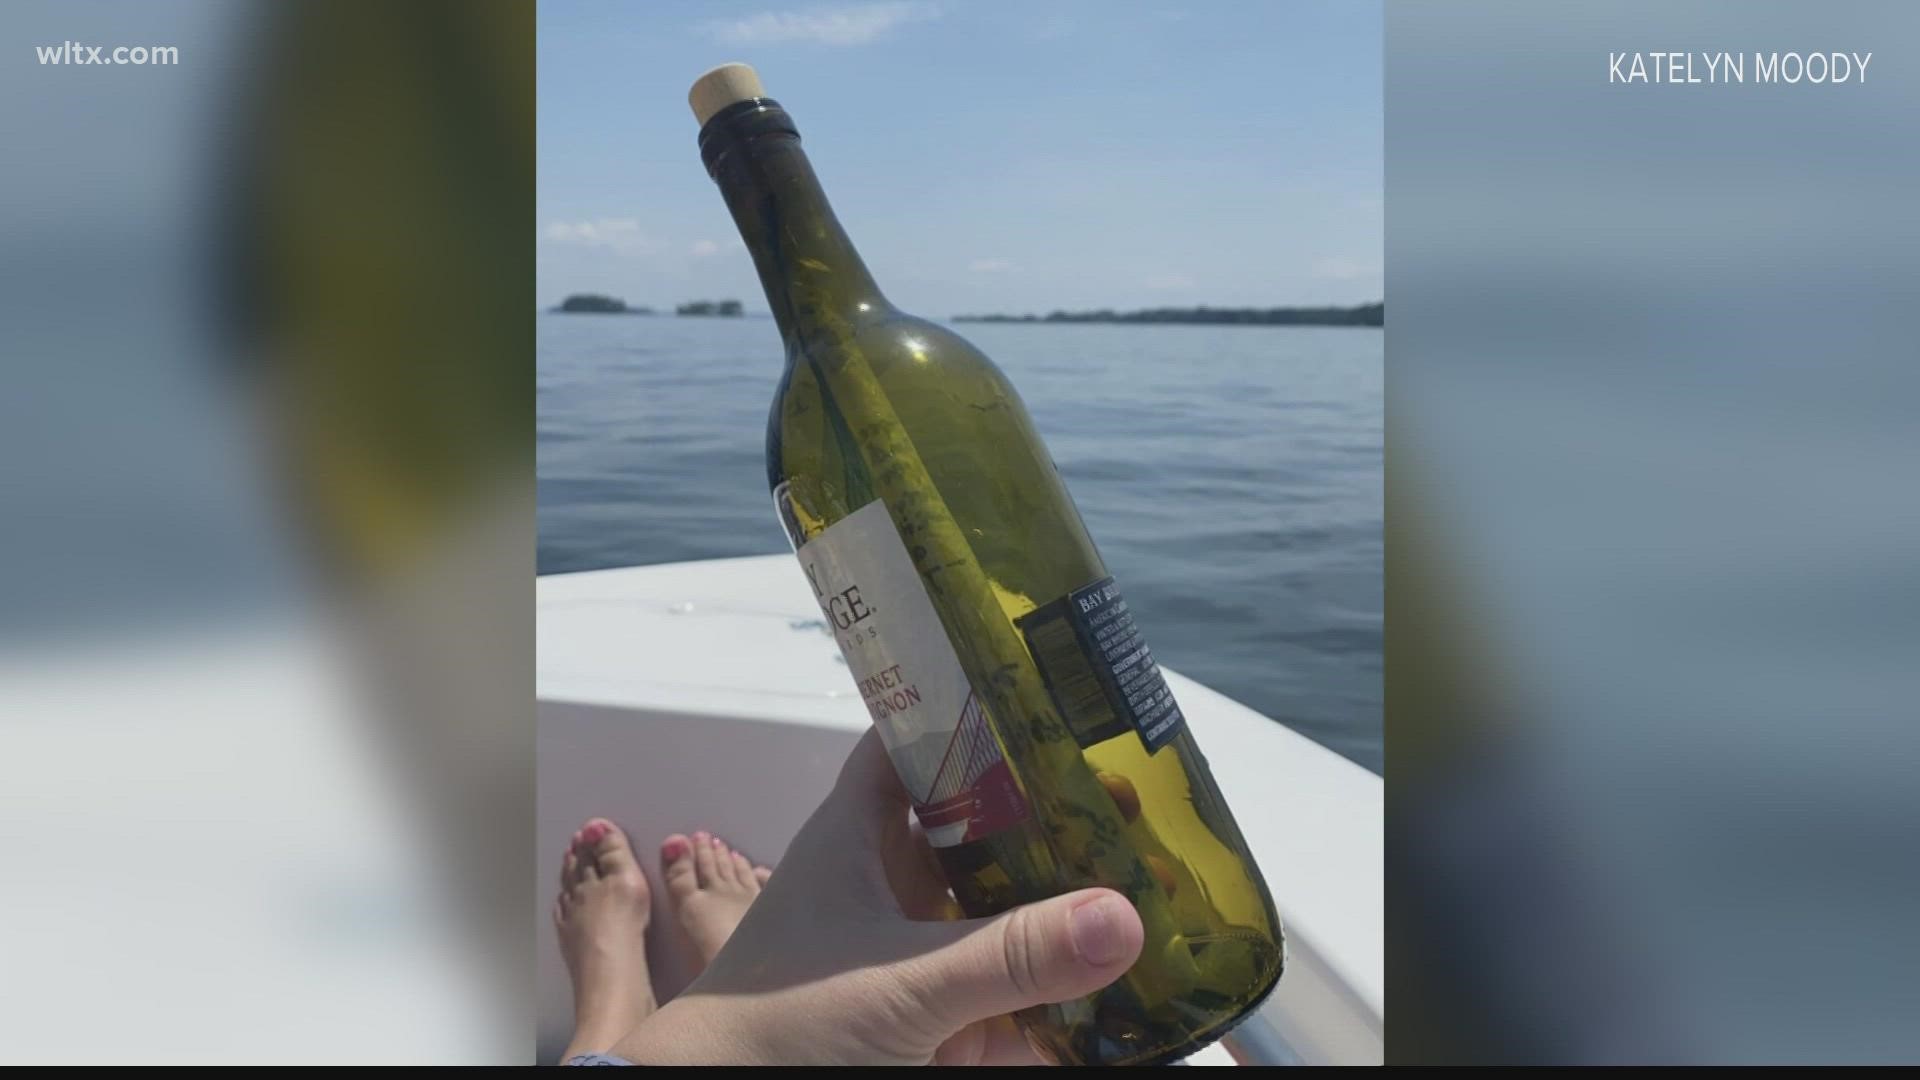 The couple picked up the bottle thinking it was trash.  It wasn't.